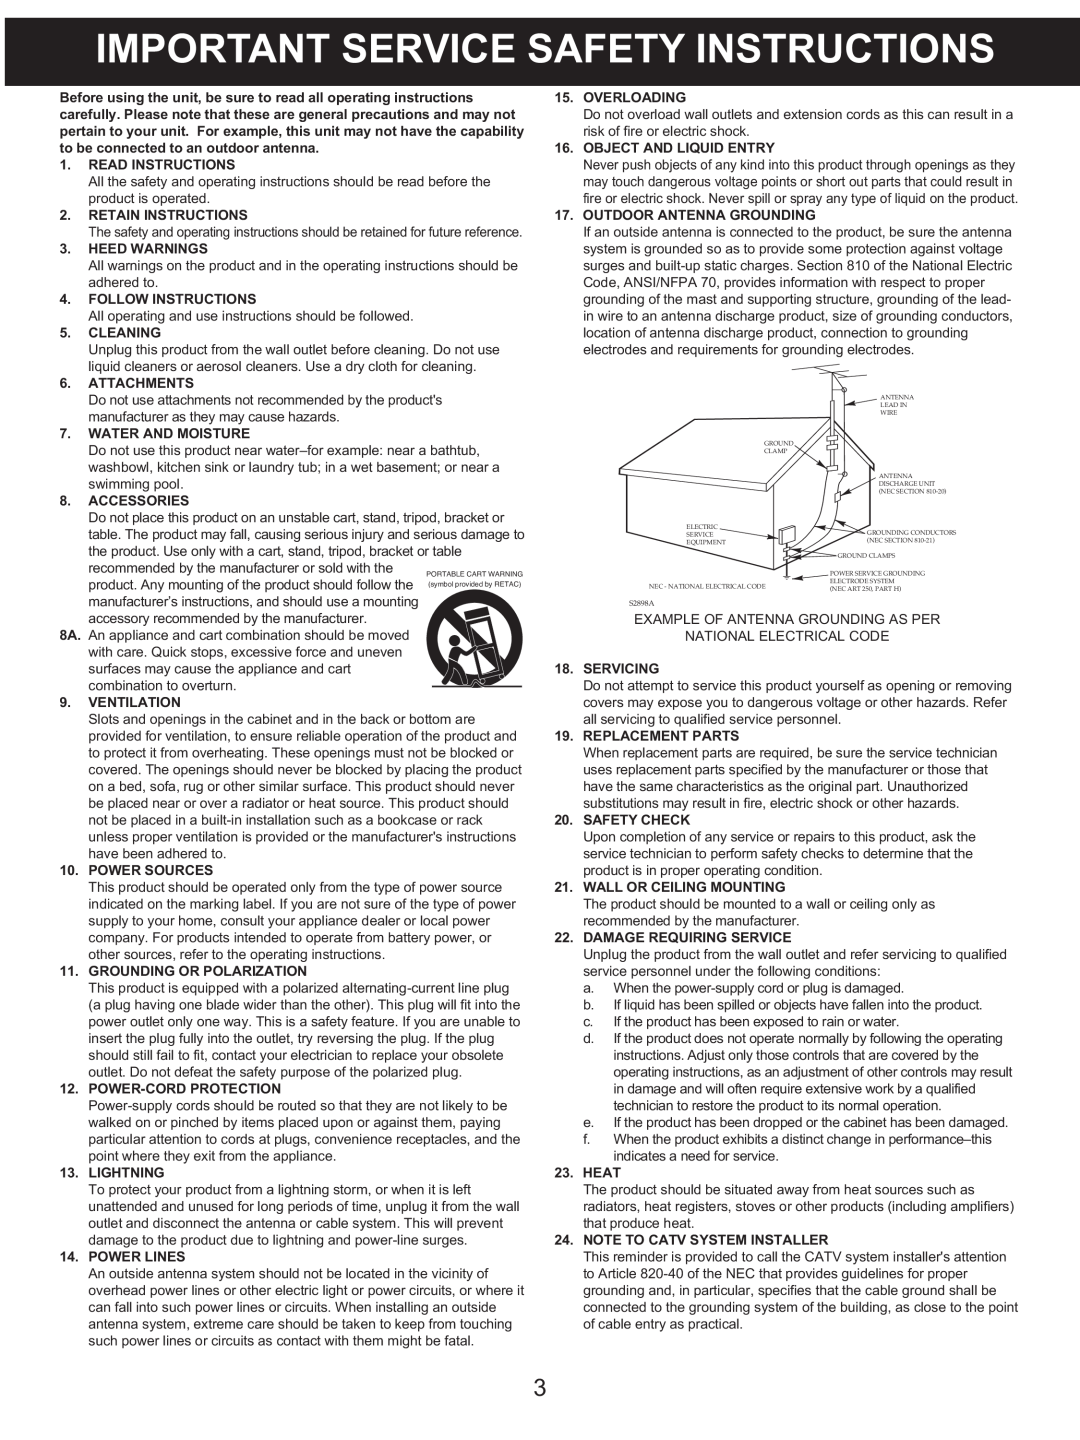 Memorex MX4122 manual Important Service Safety Instructions 